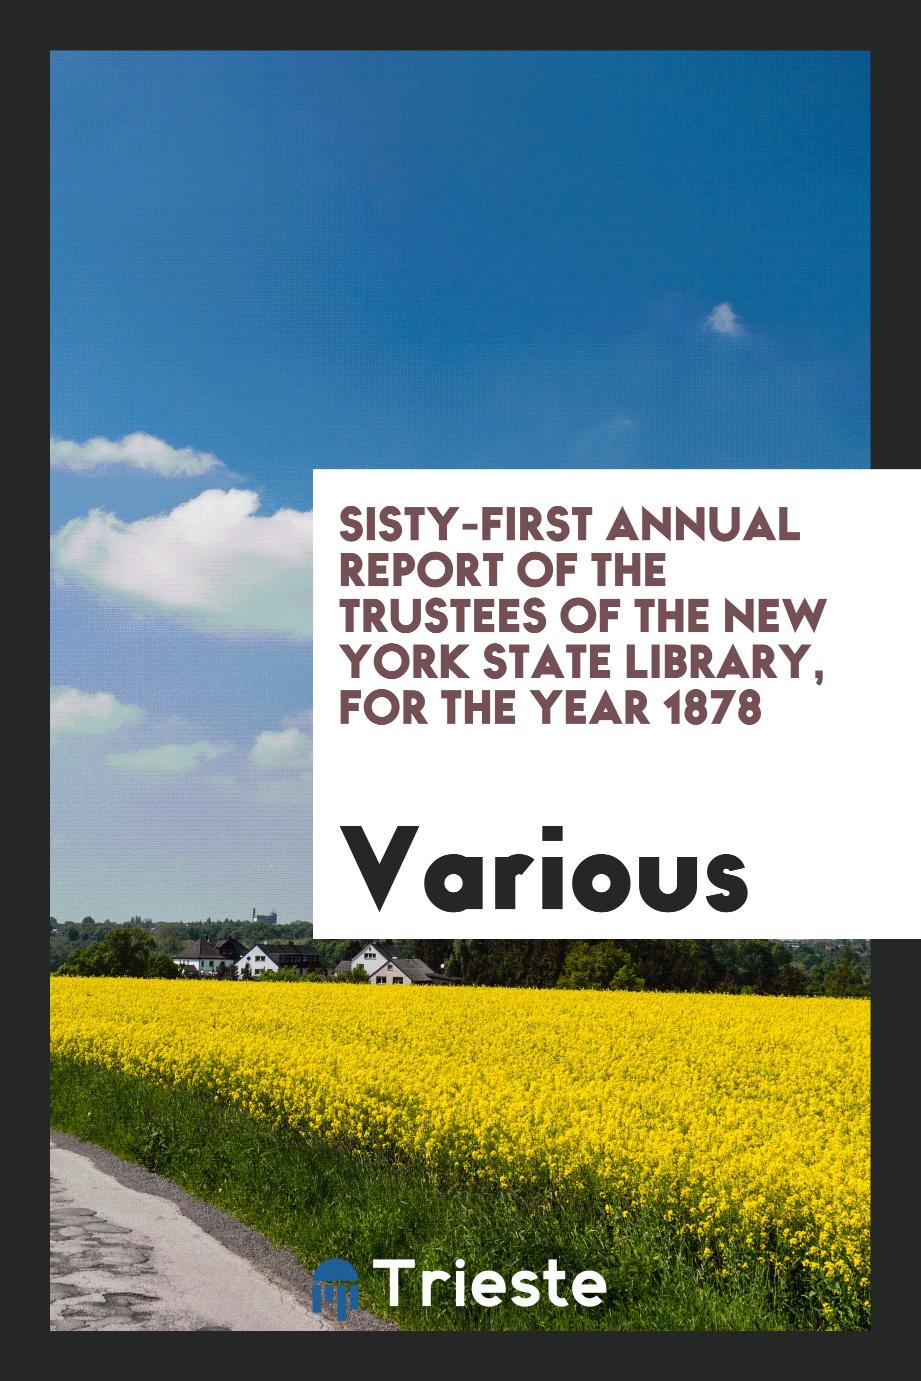 Sisty-First Annual Report of the Trustees of the New York State Library, for the Year 1878